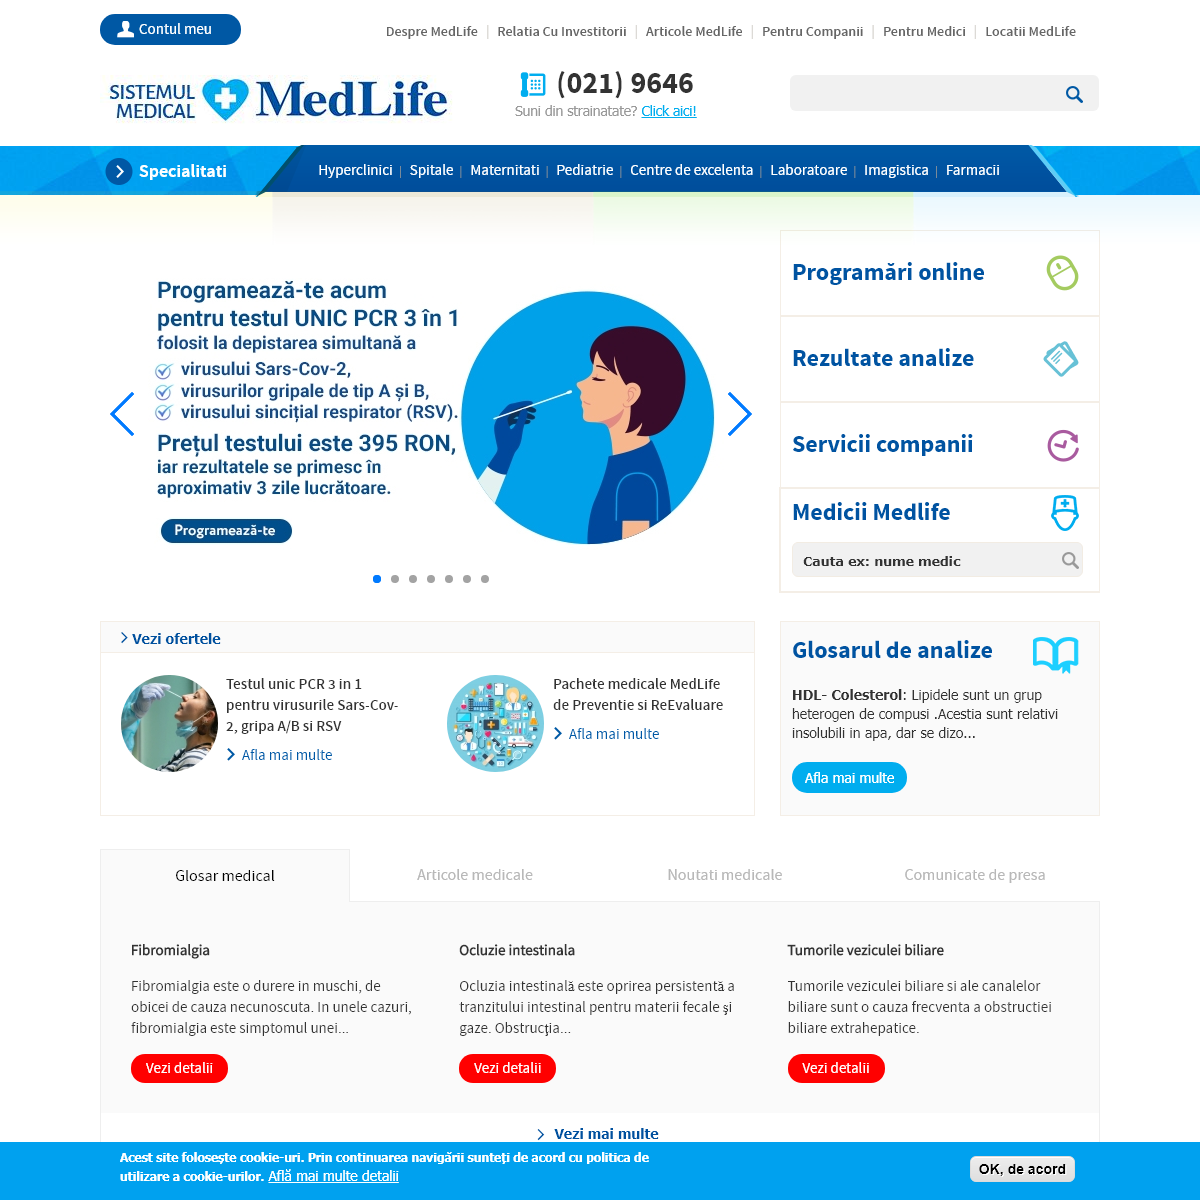 A complete backup of medlife.ro